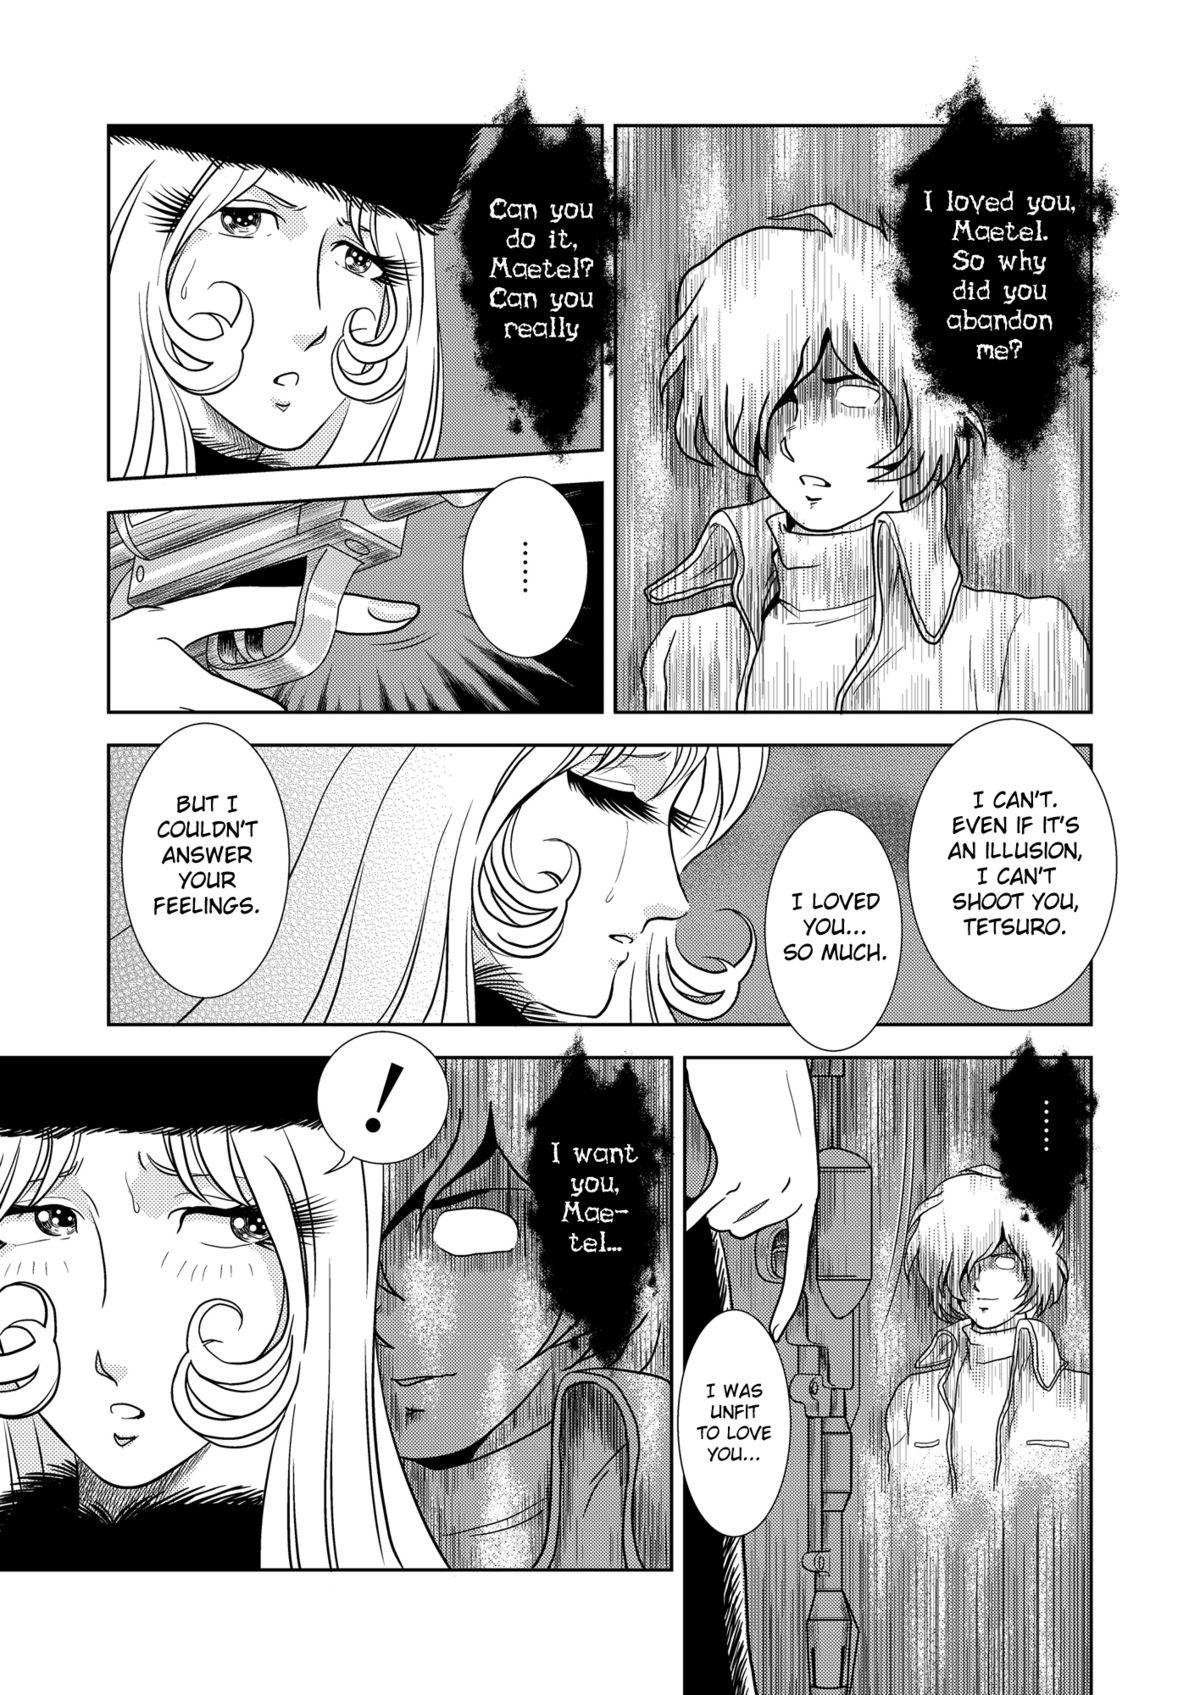 Culo Maetel Story - Galaxy express 999 Solo Girl - Page 7